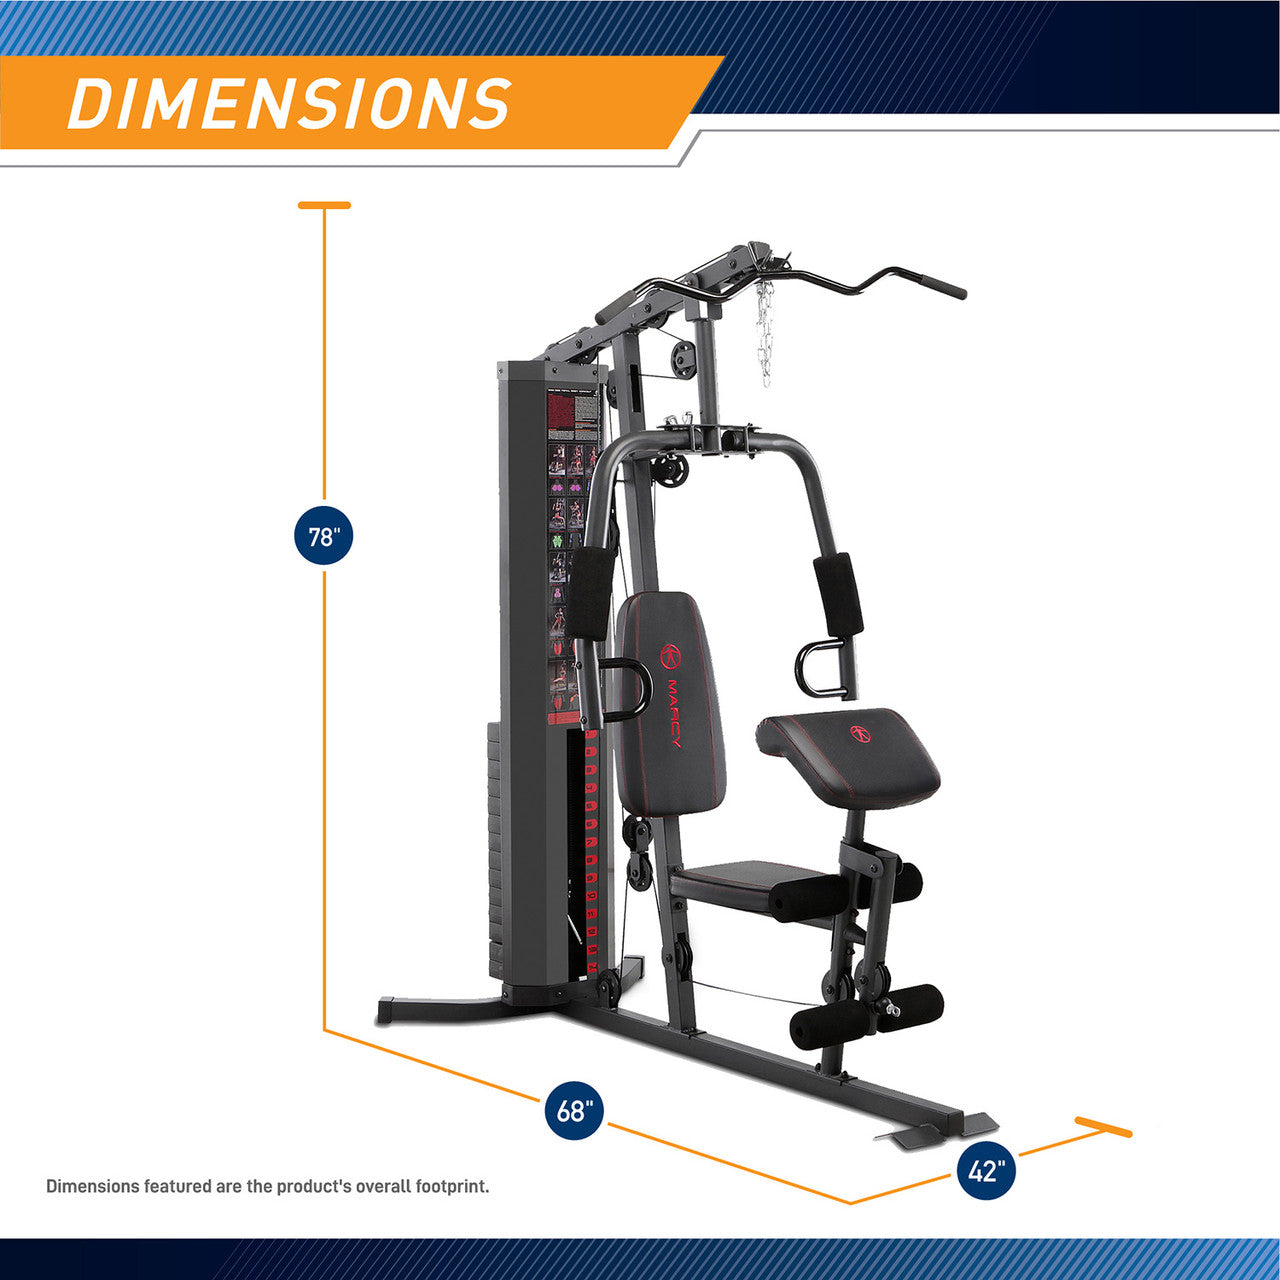 Marcy 150lb Stack Weight Home Gym Mwm